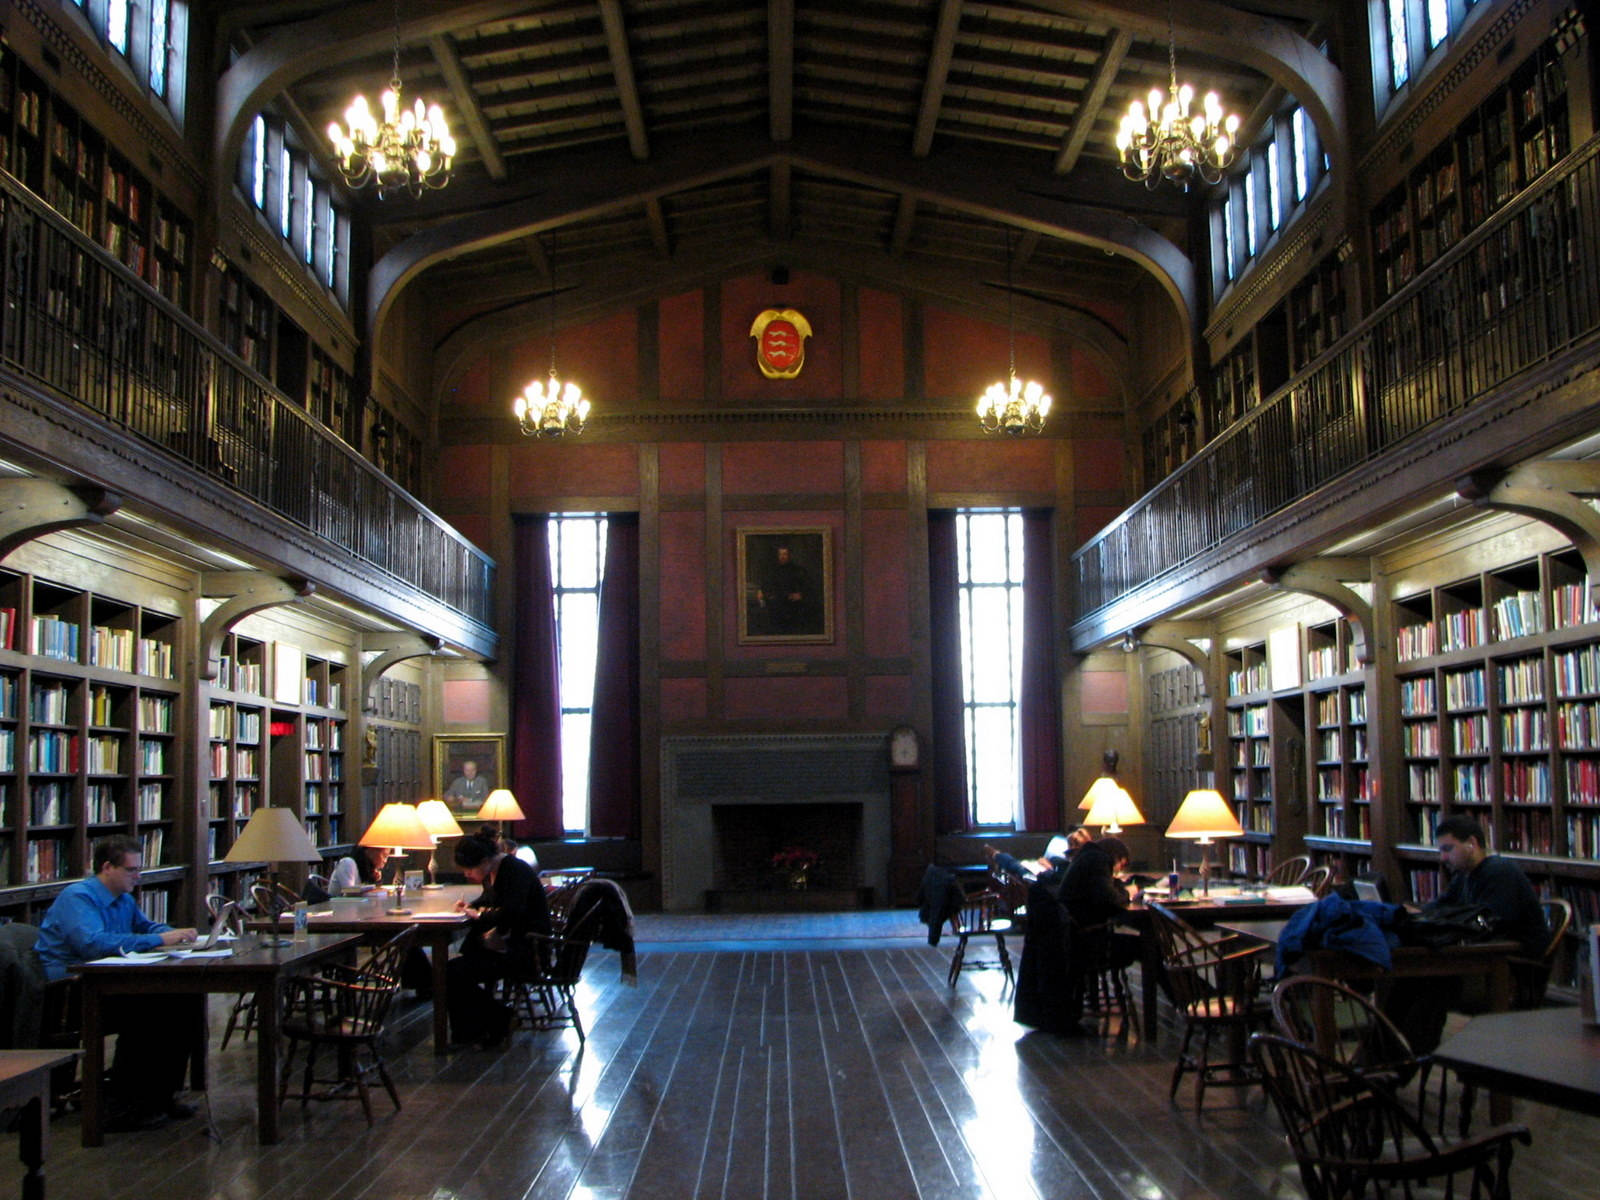 "Yale University's resplendent library interior with study carrels" Wallpaper